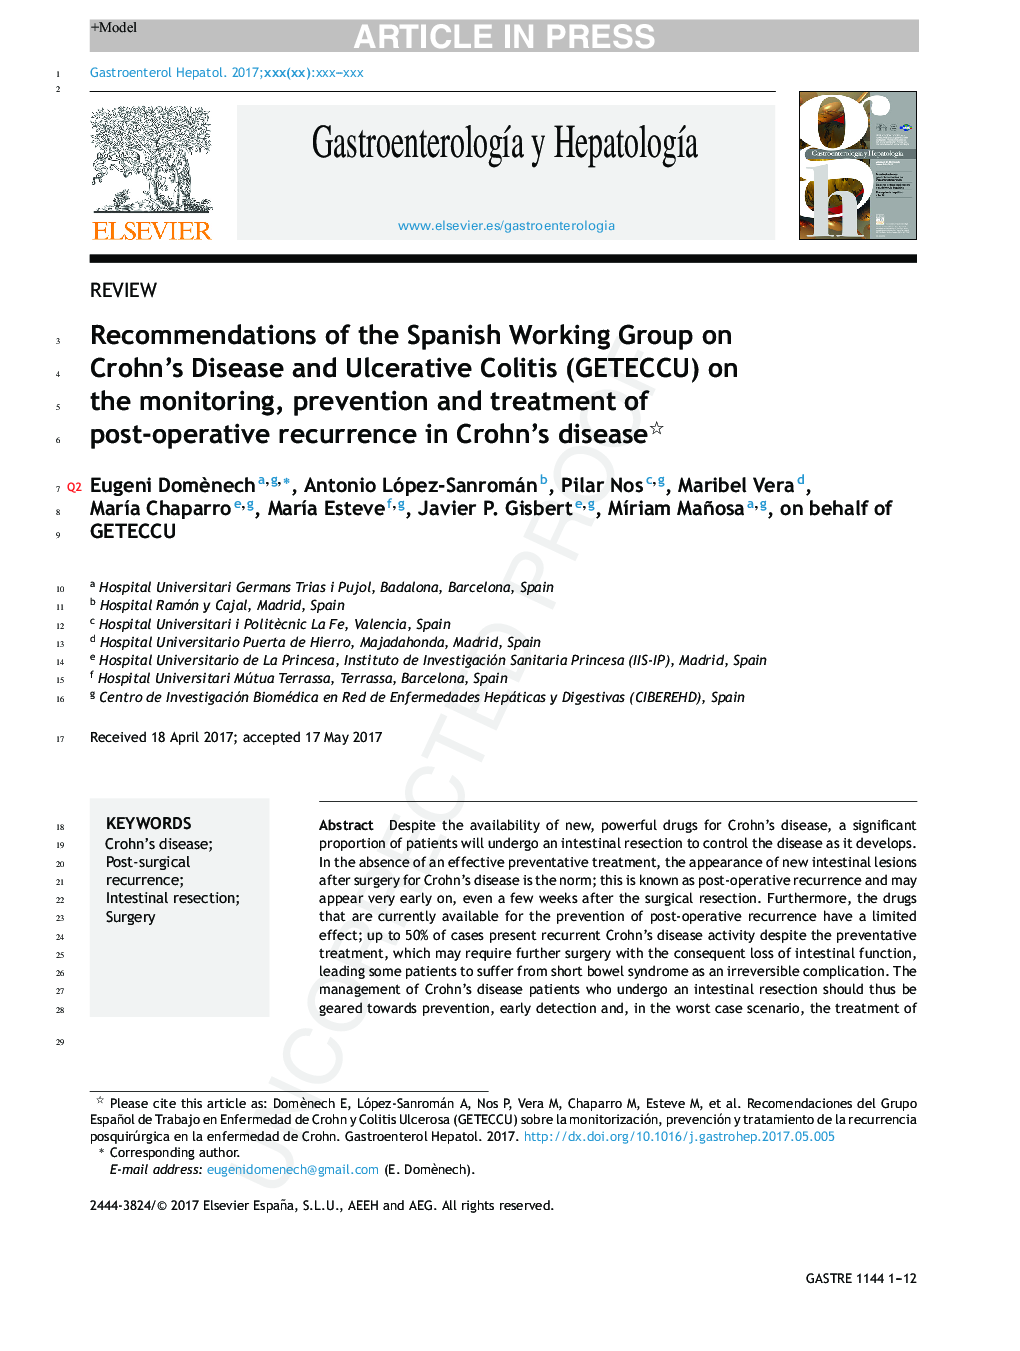 Recommendations of the Spanish Working Group on Crohn's Disease and Ulcerative Colitis (GETECCU) on the monitoring, prevention and treatment of post-operative recurrence in Crohn's disease